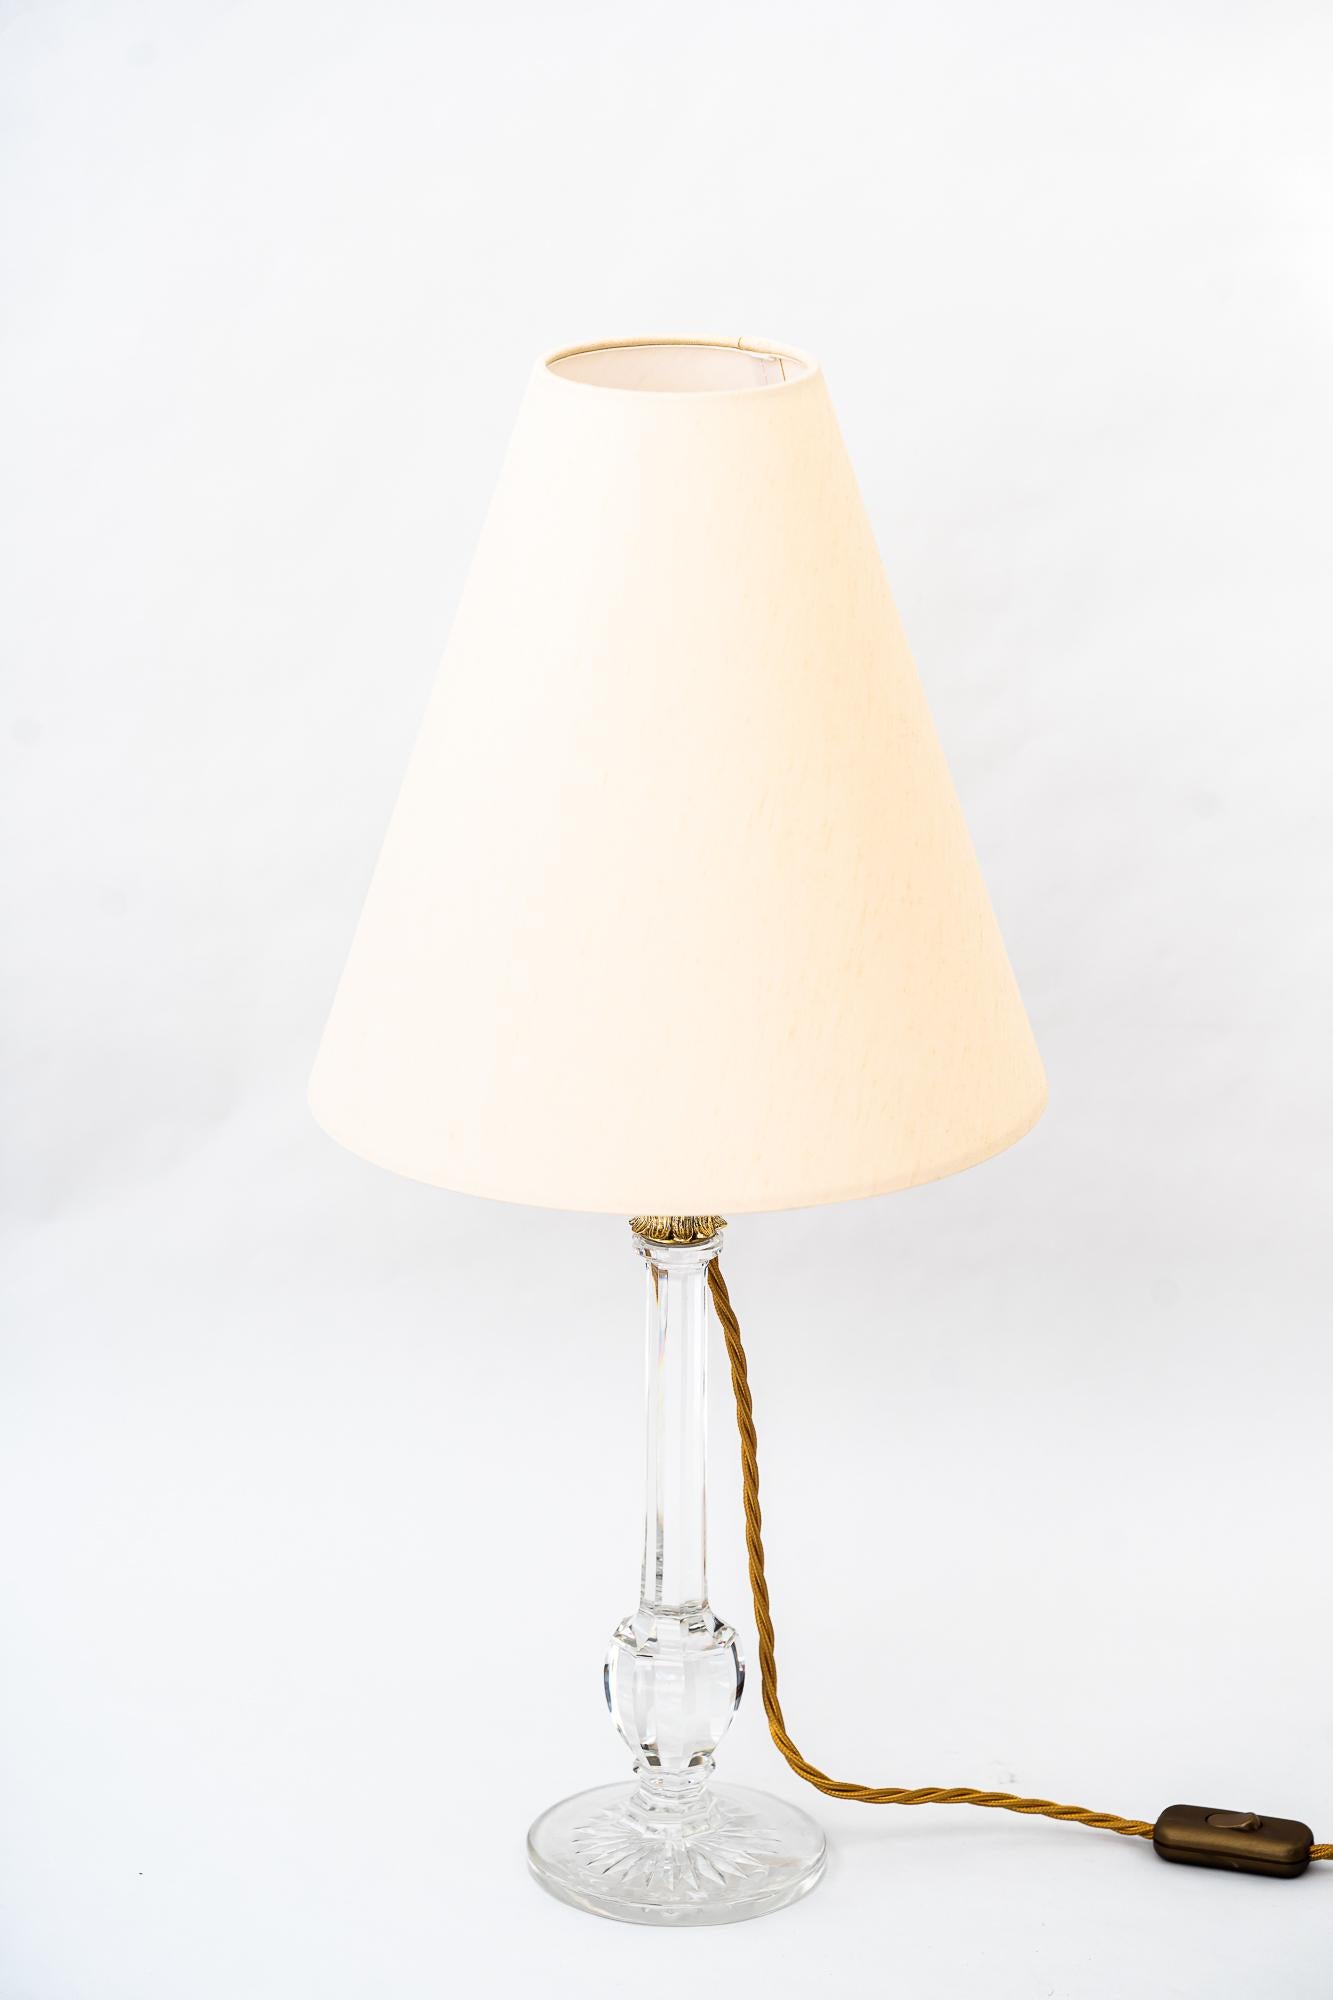 Art Deco glass table lamp with fabric shade around 1920s.
The fabric shade is replaced (new).